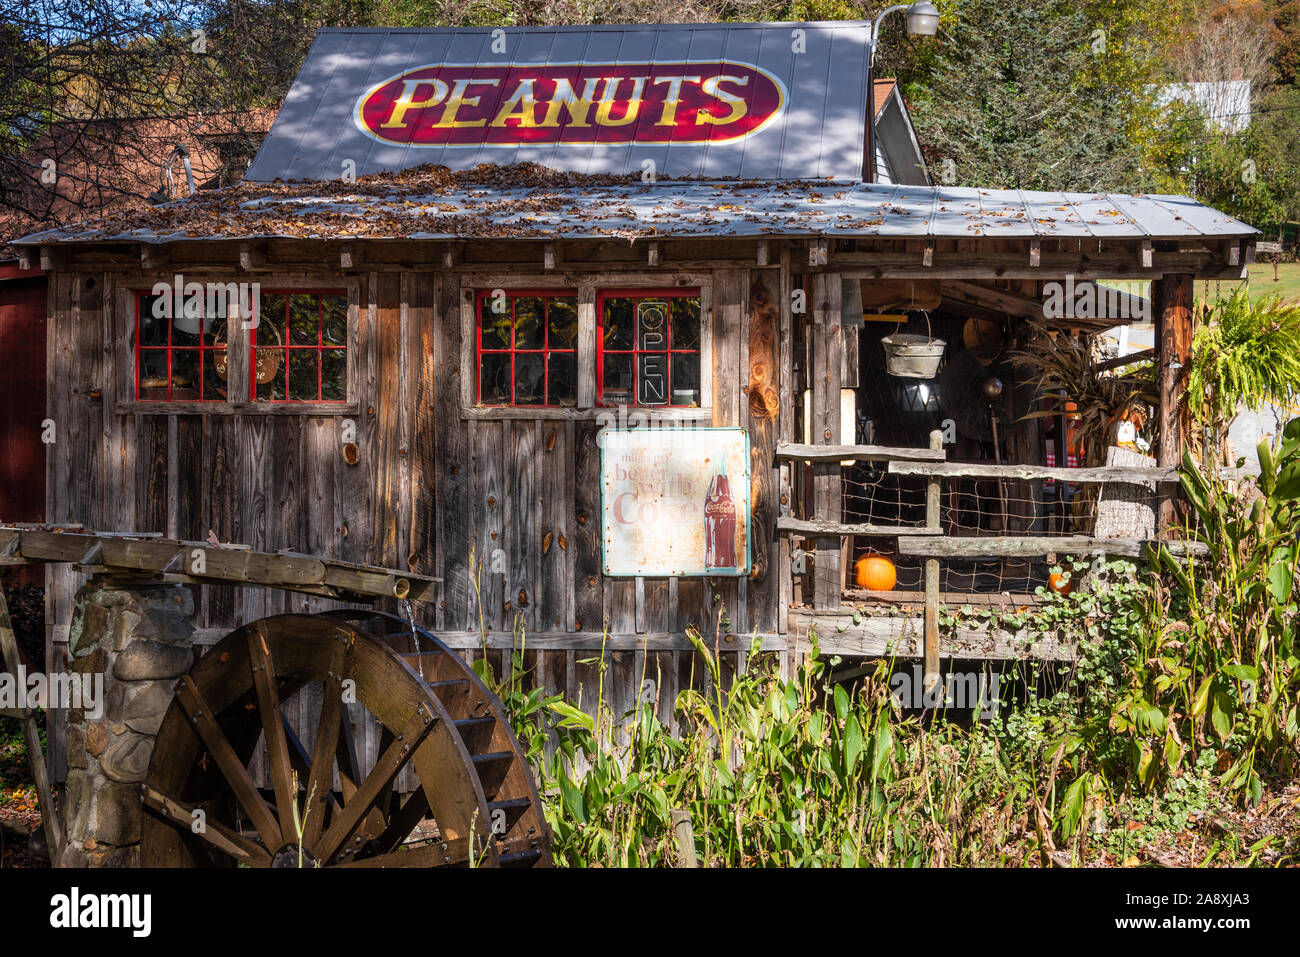 Fred's Famous Peanuts country store in Helen, Georgia, nestled in the Chattahoochee National Forest of the Blue Ridge Mountains. (USA) Stock Photo